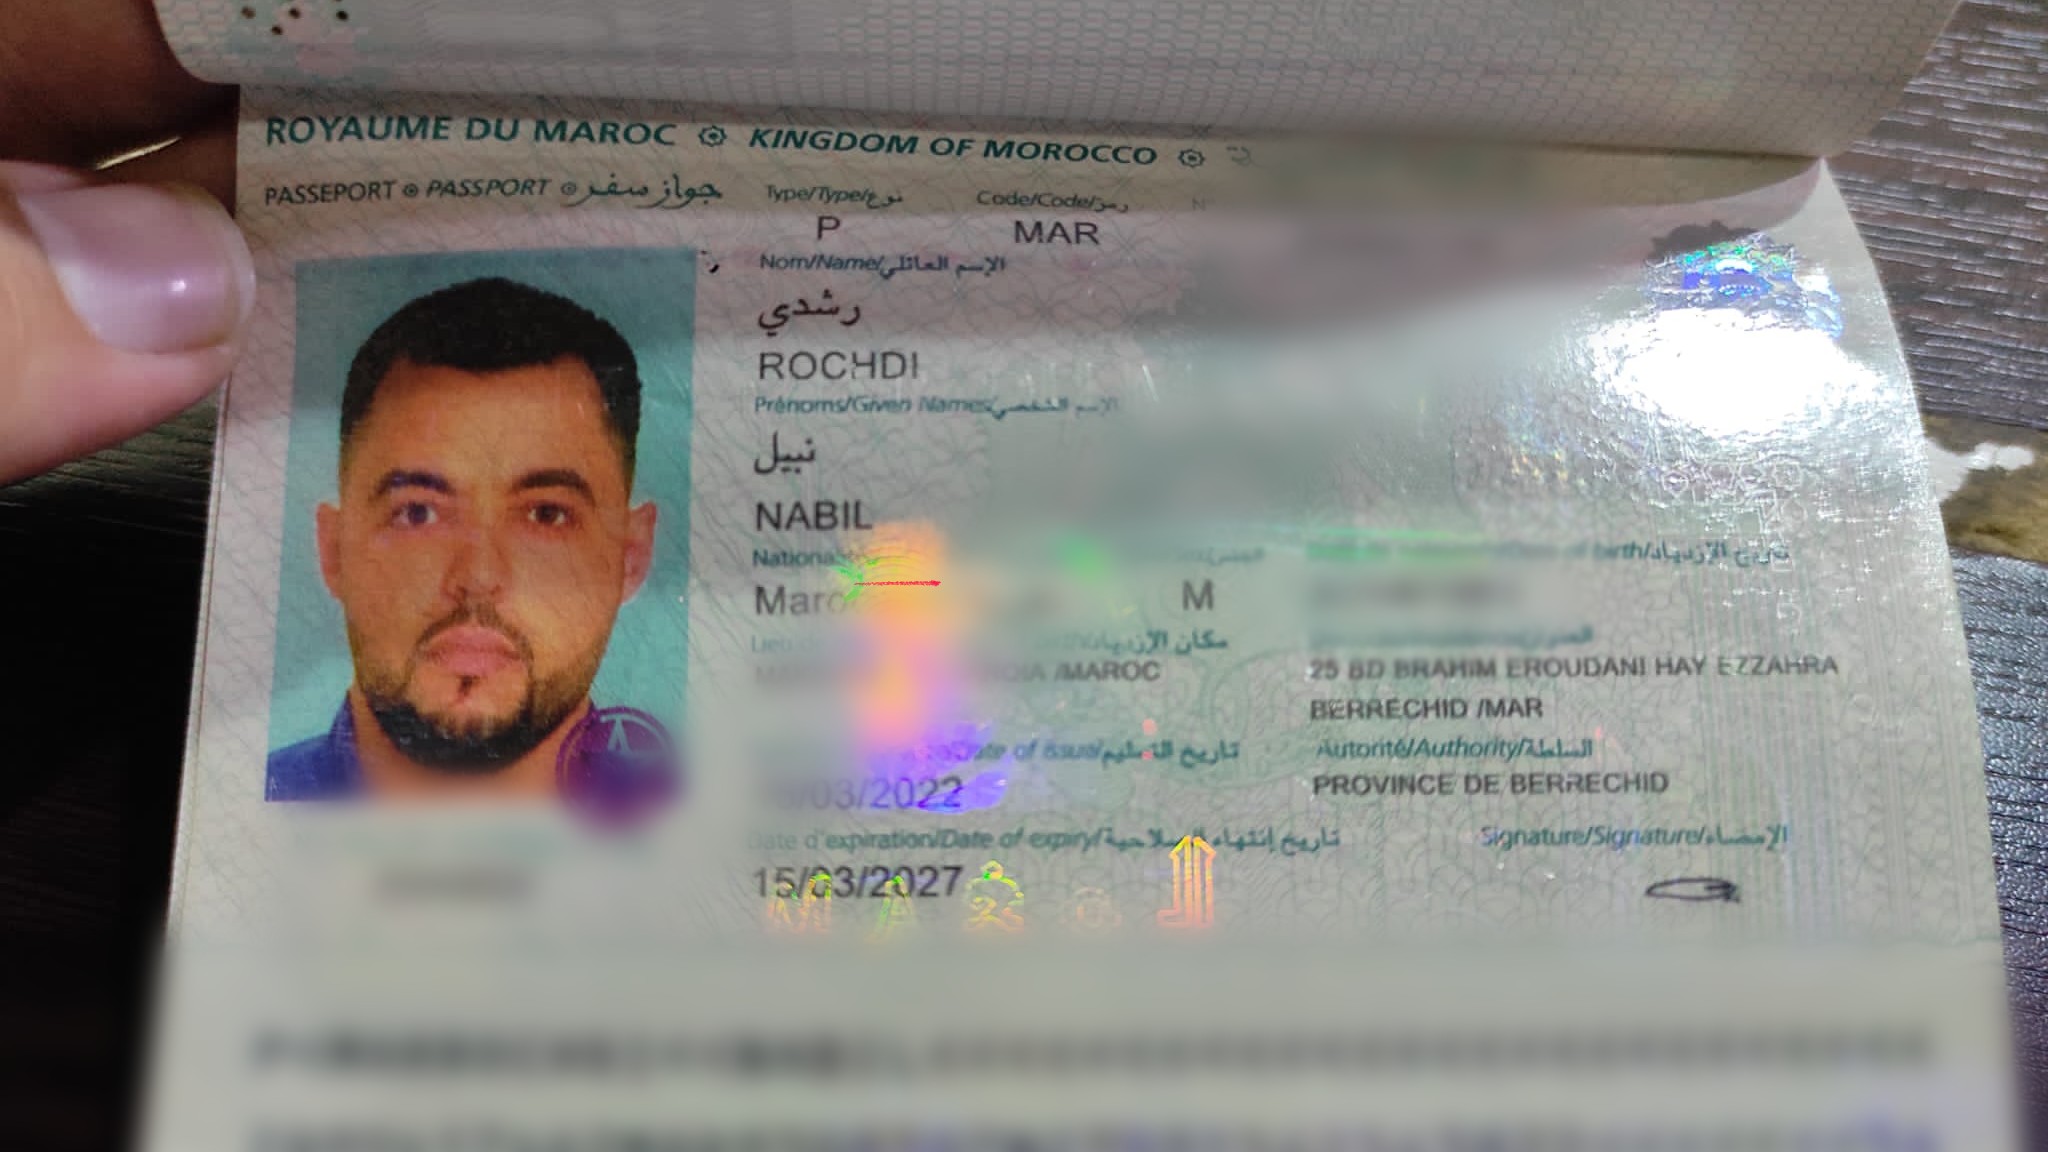 Moroccan national Nabil Rochdi presented Middle East Eye with copies of his passport, as shown here, and his National ID (MEE/MEE Correspondent)